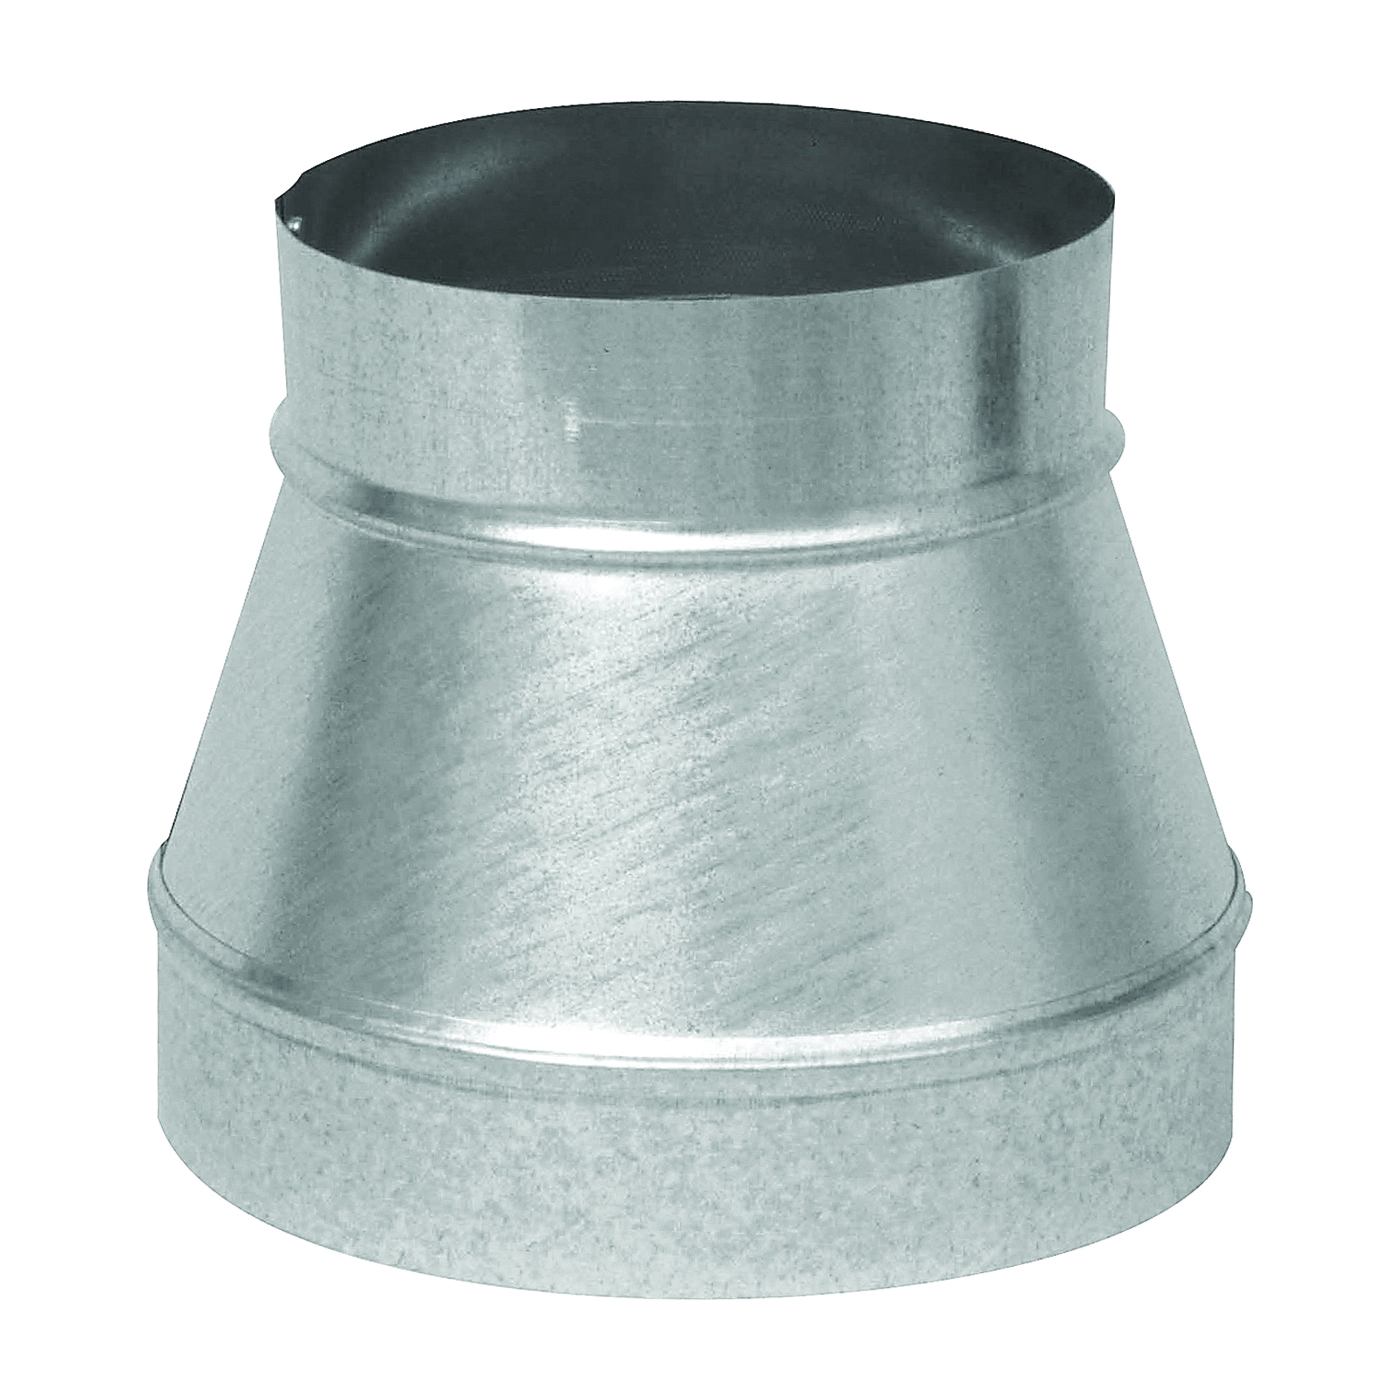 GV1269 Stove Pipe Reducer, 9 x 6 in, 26 ga Thick Wall, Black, Galvanized